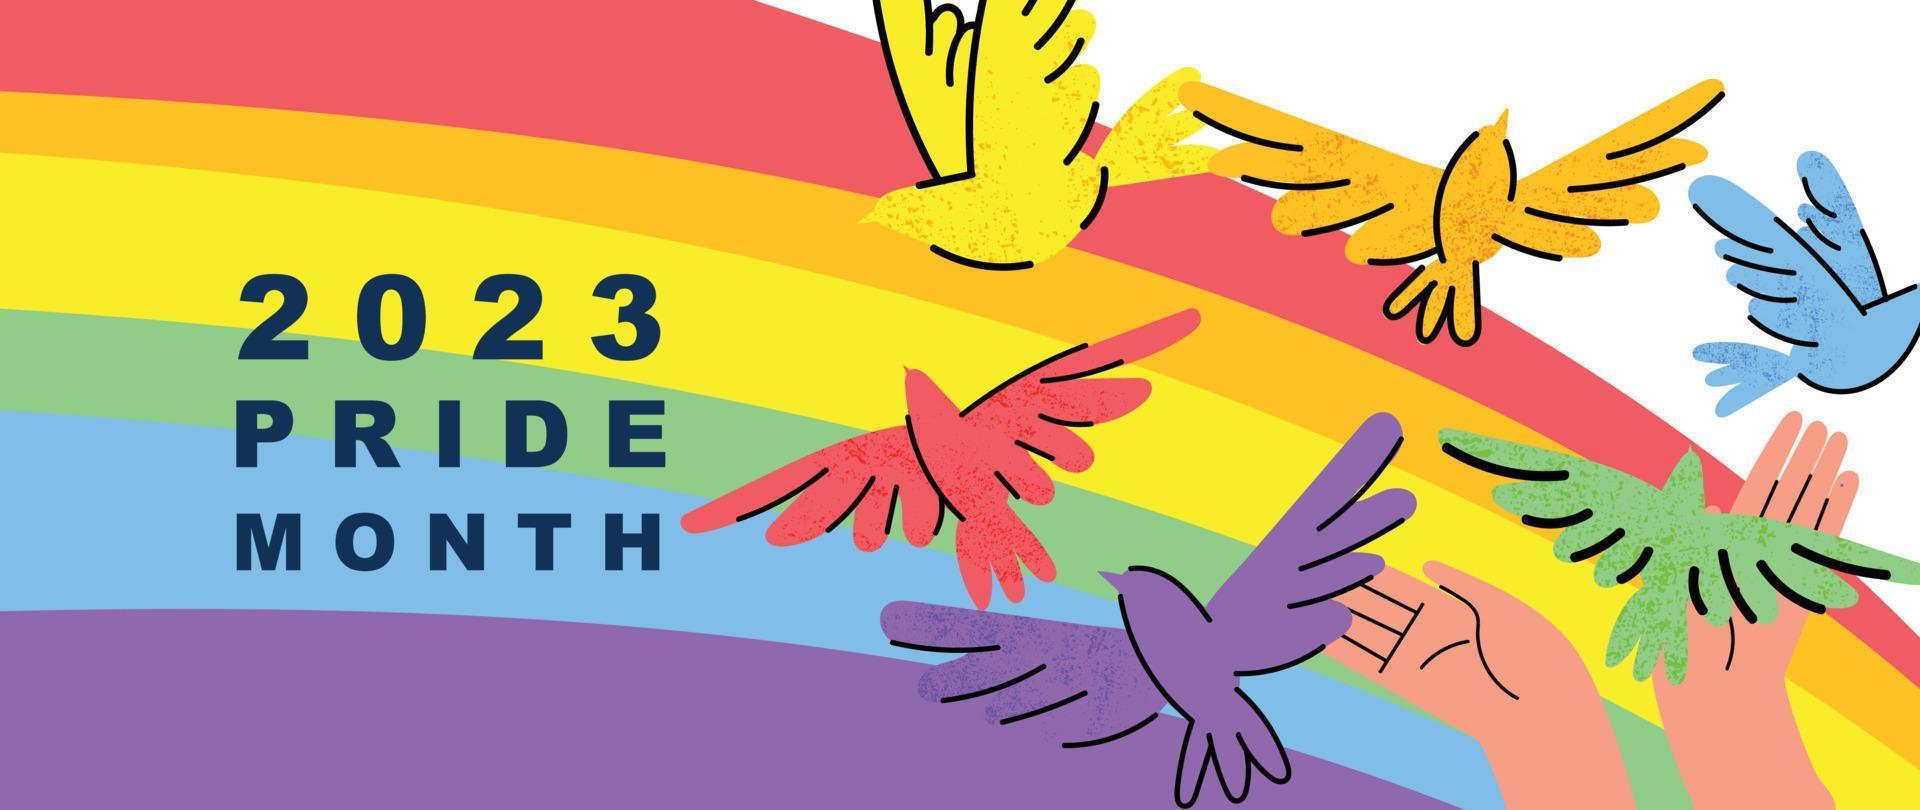 Happy Pride month background. LGBTQ community symbols with rainbow, bird, hand sign. Design for celebration against violence, bisexual, transgender, gender equality, rights concept. vector